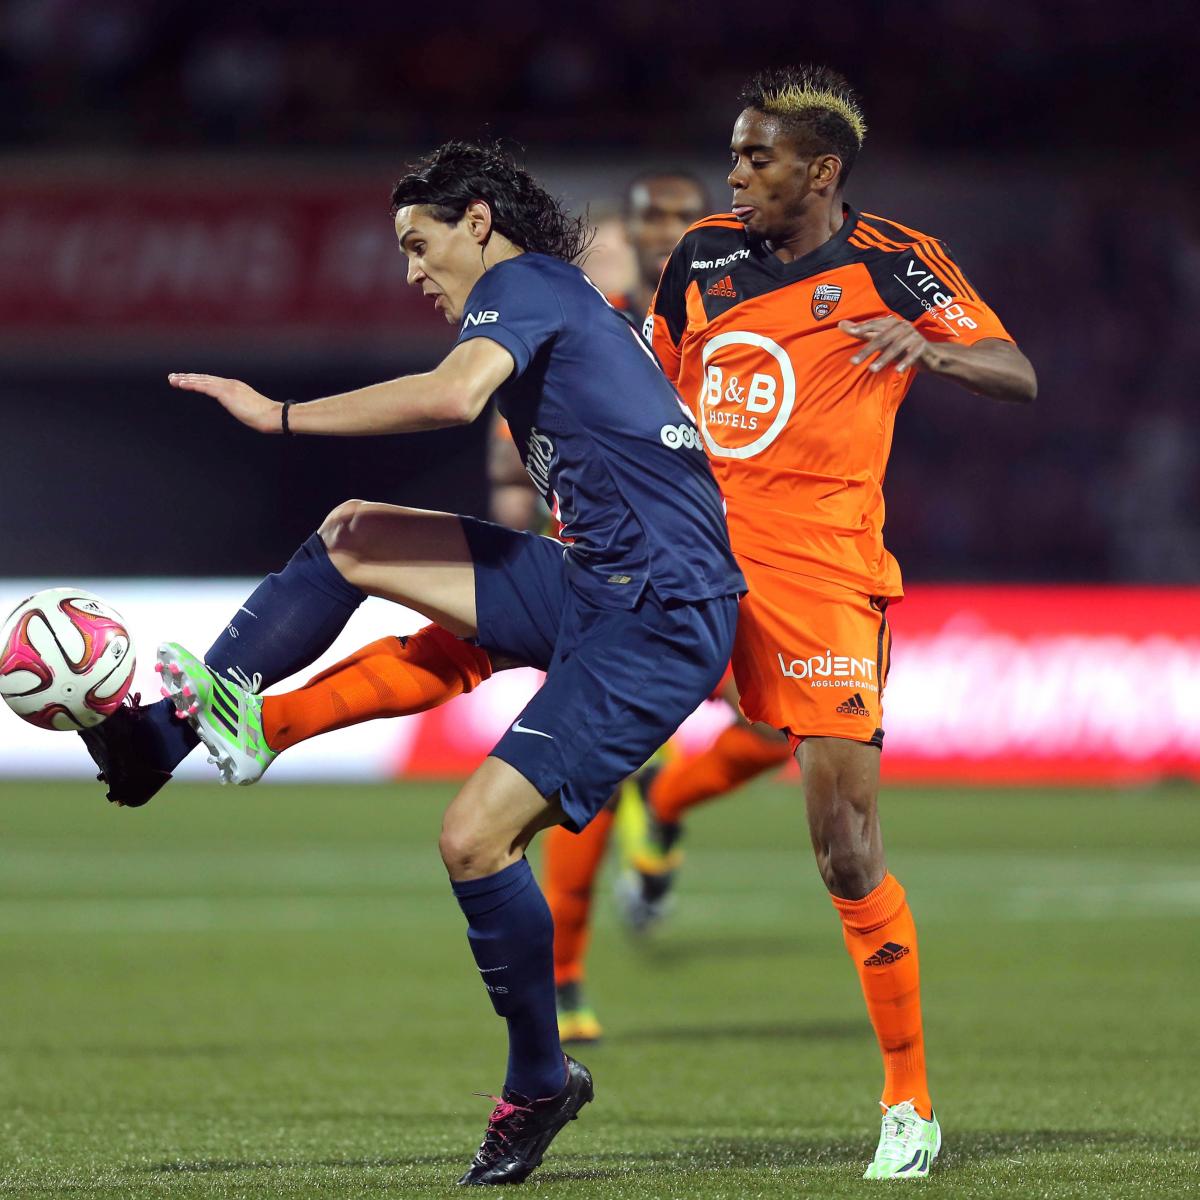 PSG vs. Lorient Team News, Predicted Lineups, Live Stream and TV Info